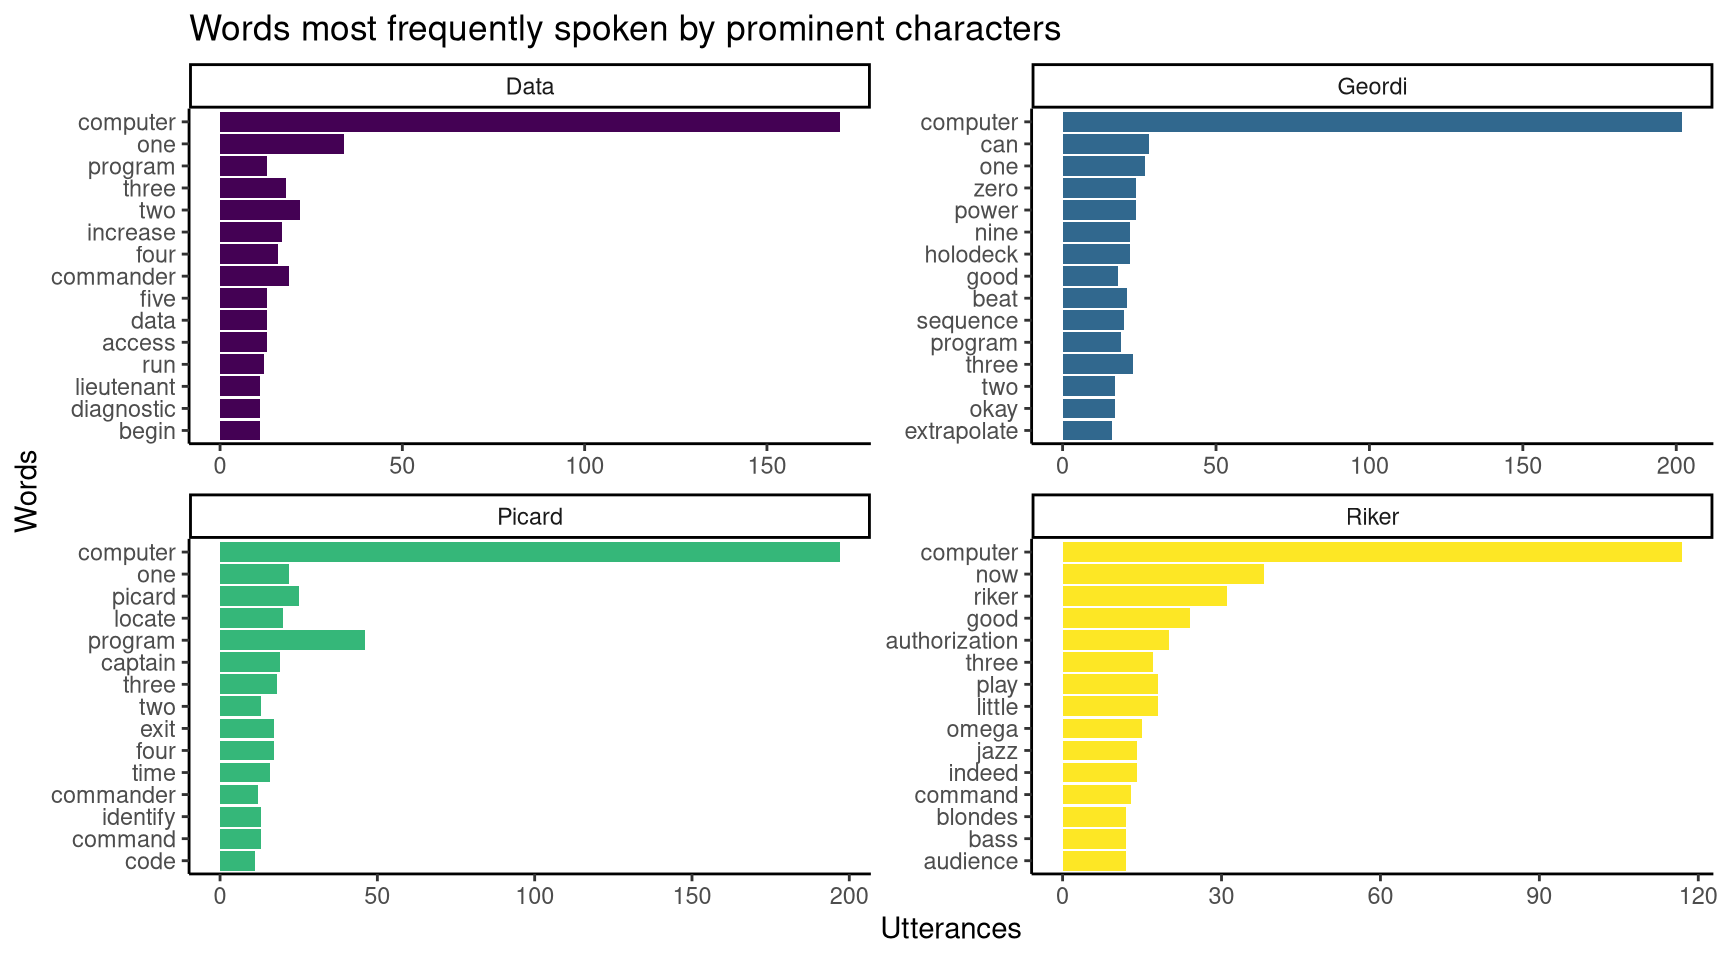 The most frequently spoken word is `computer`.